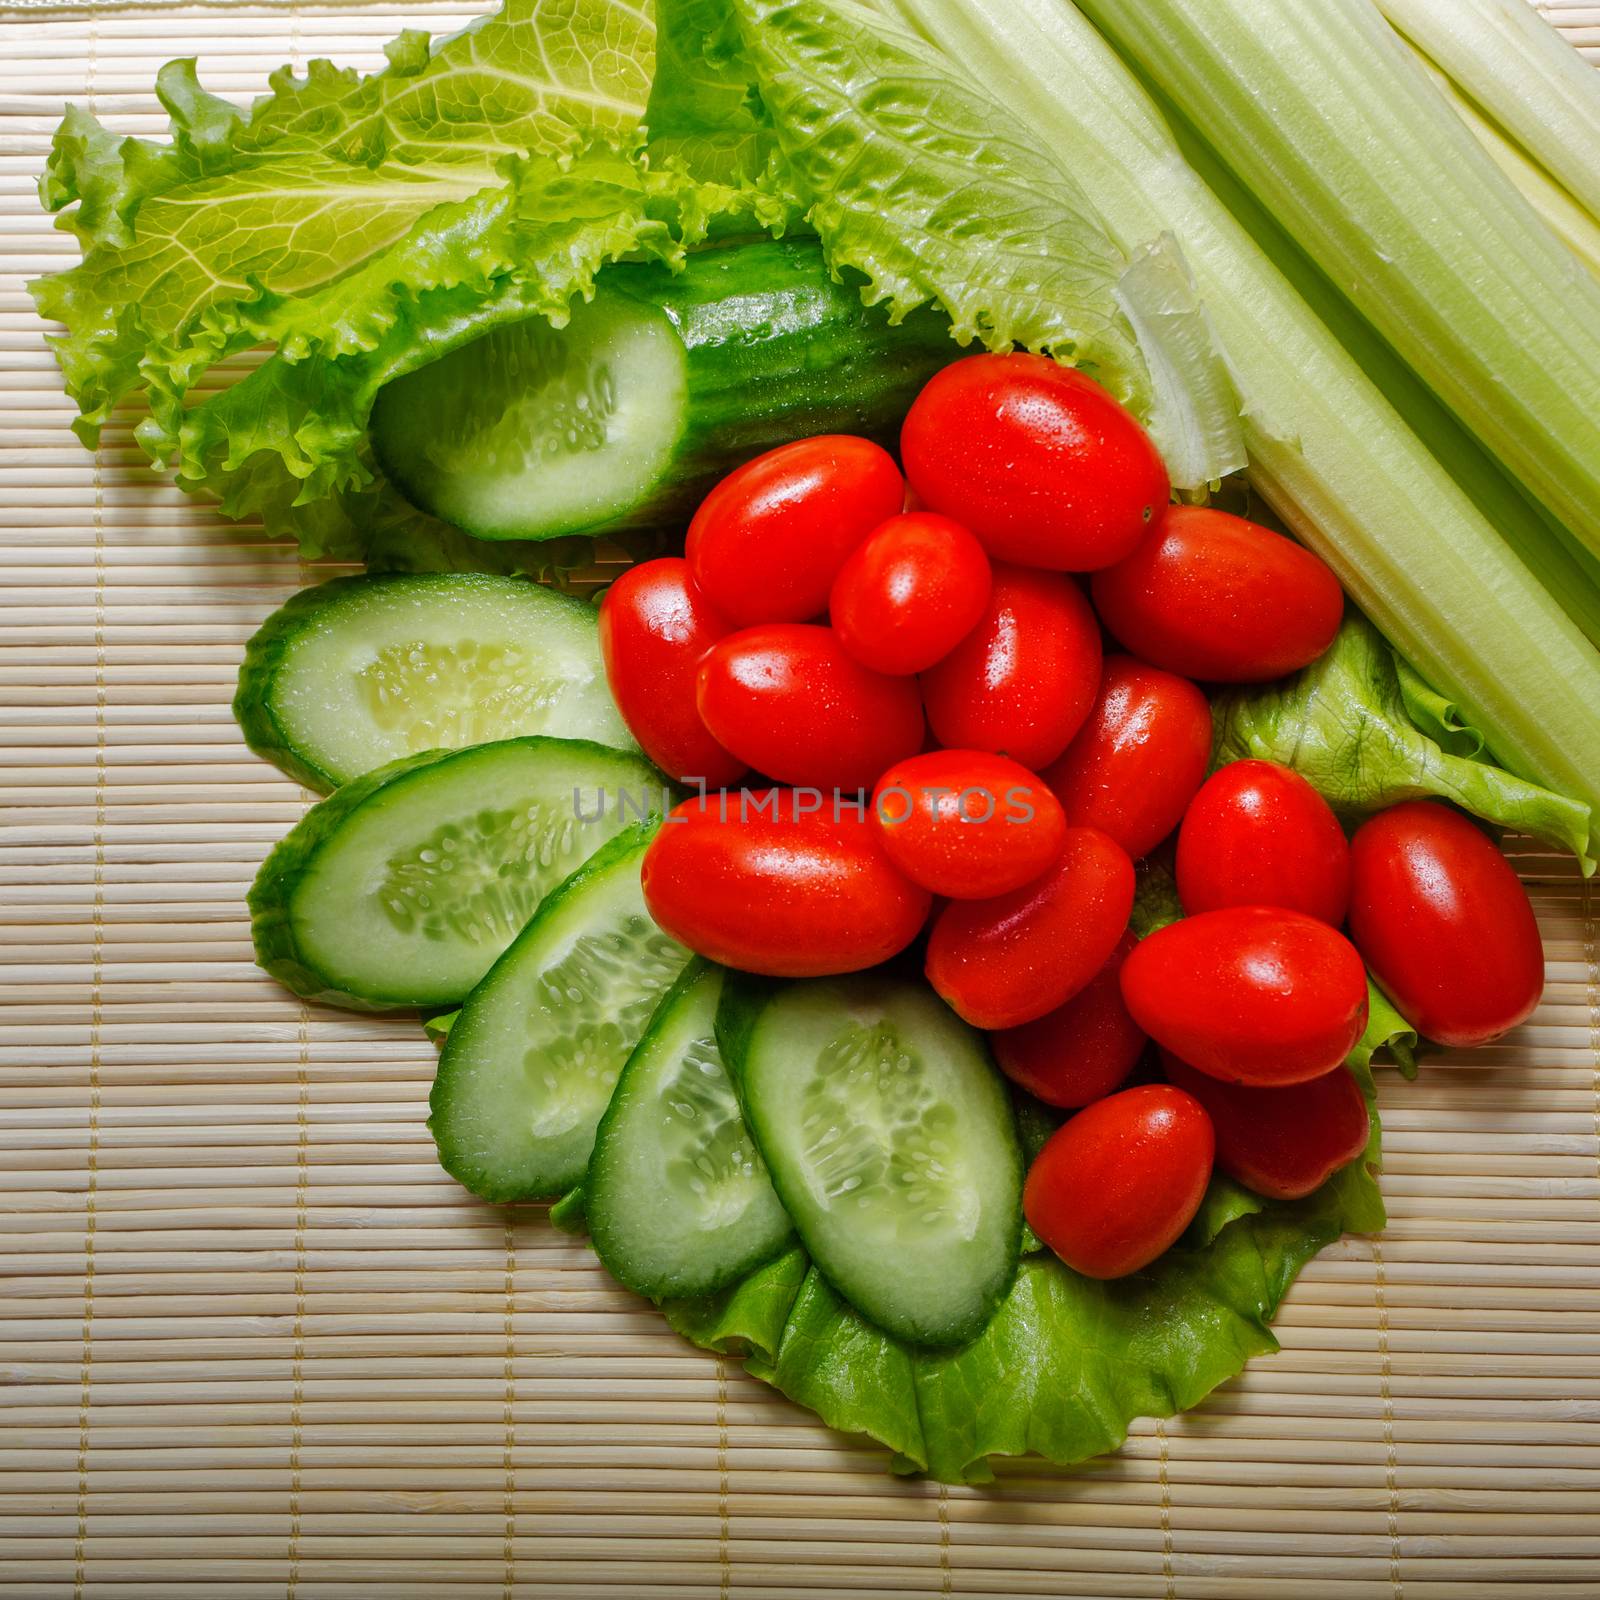 Lettuce, cucumber, tomato and celery by Vagengeym